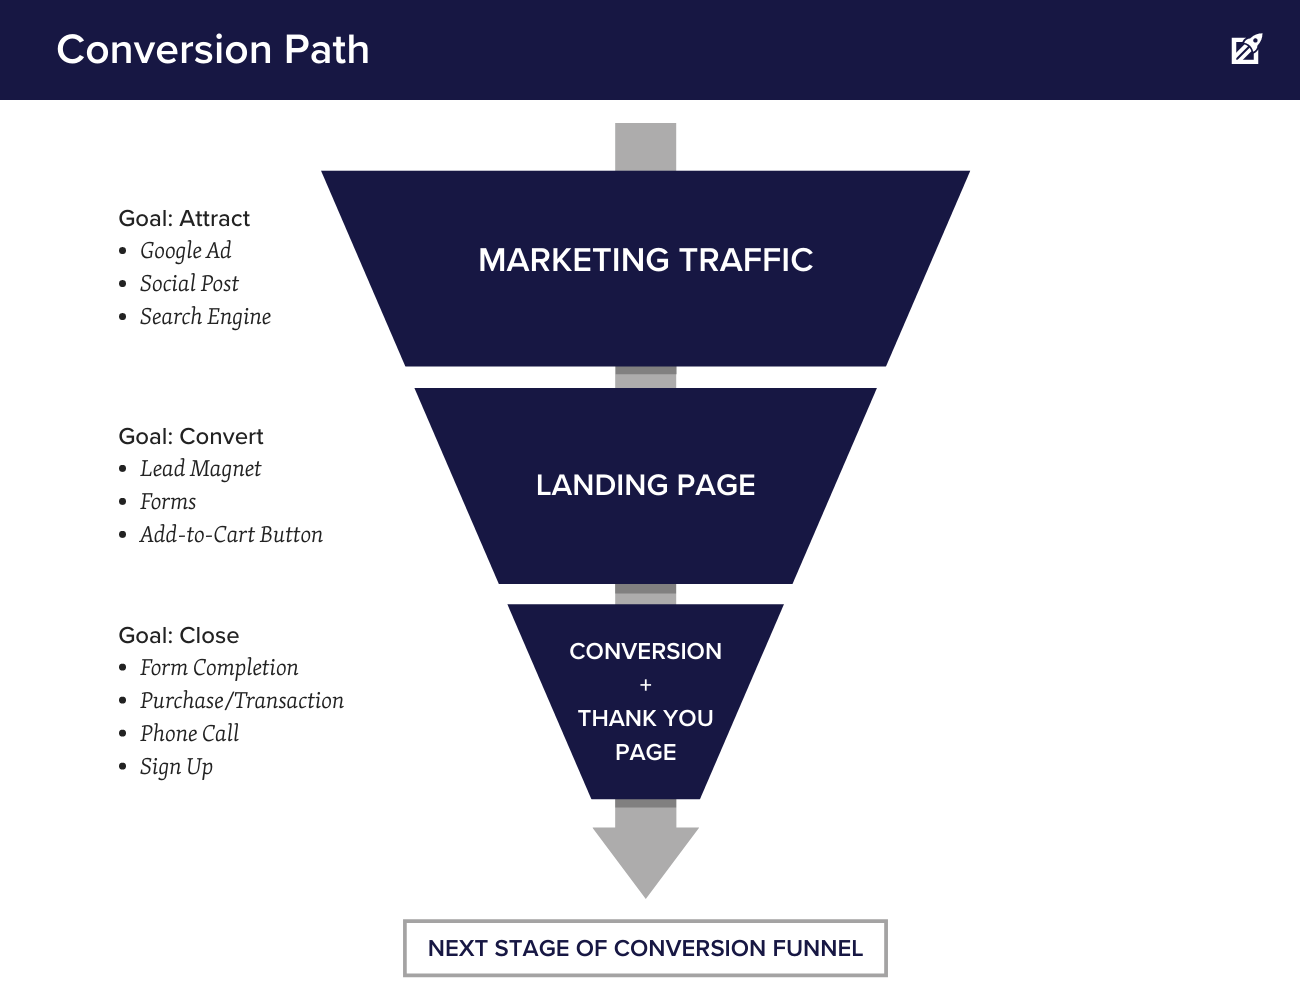 steps of a conversion path used for ppc campaigns and digital advertising